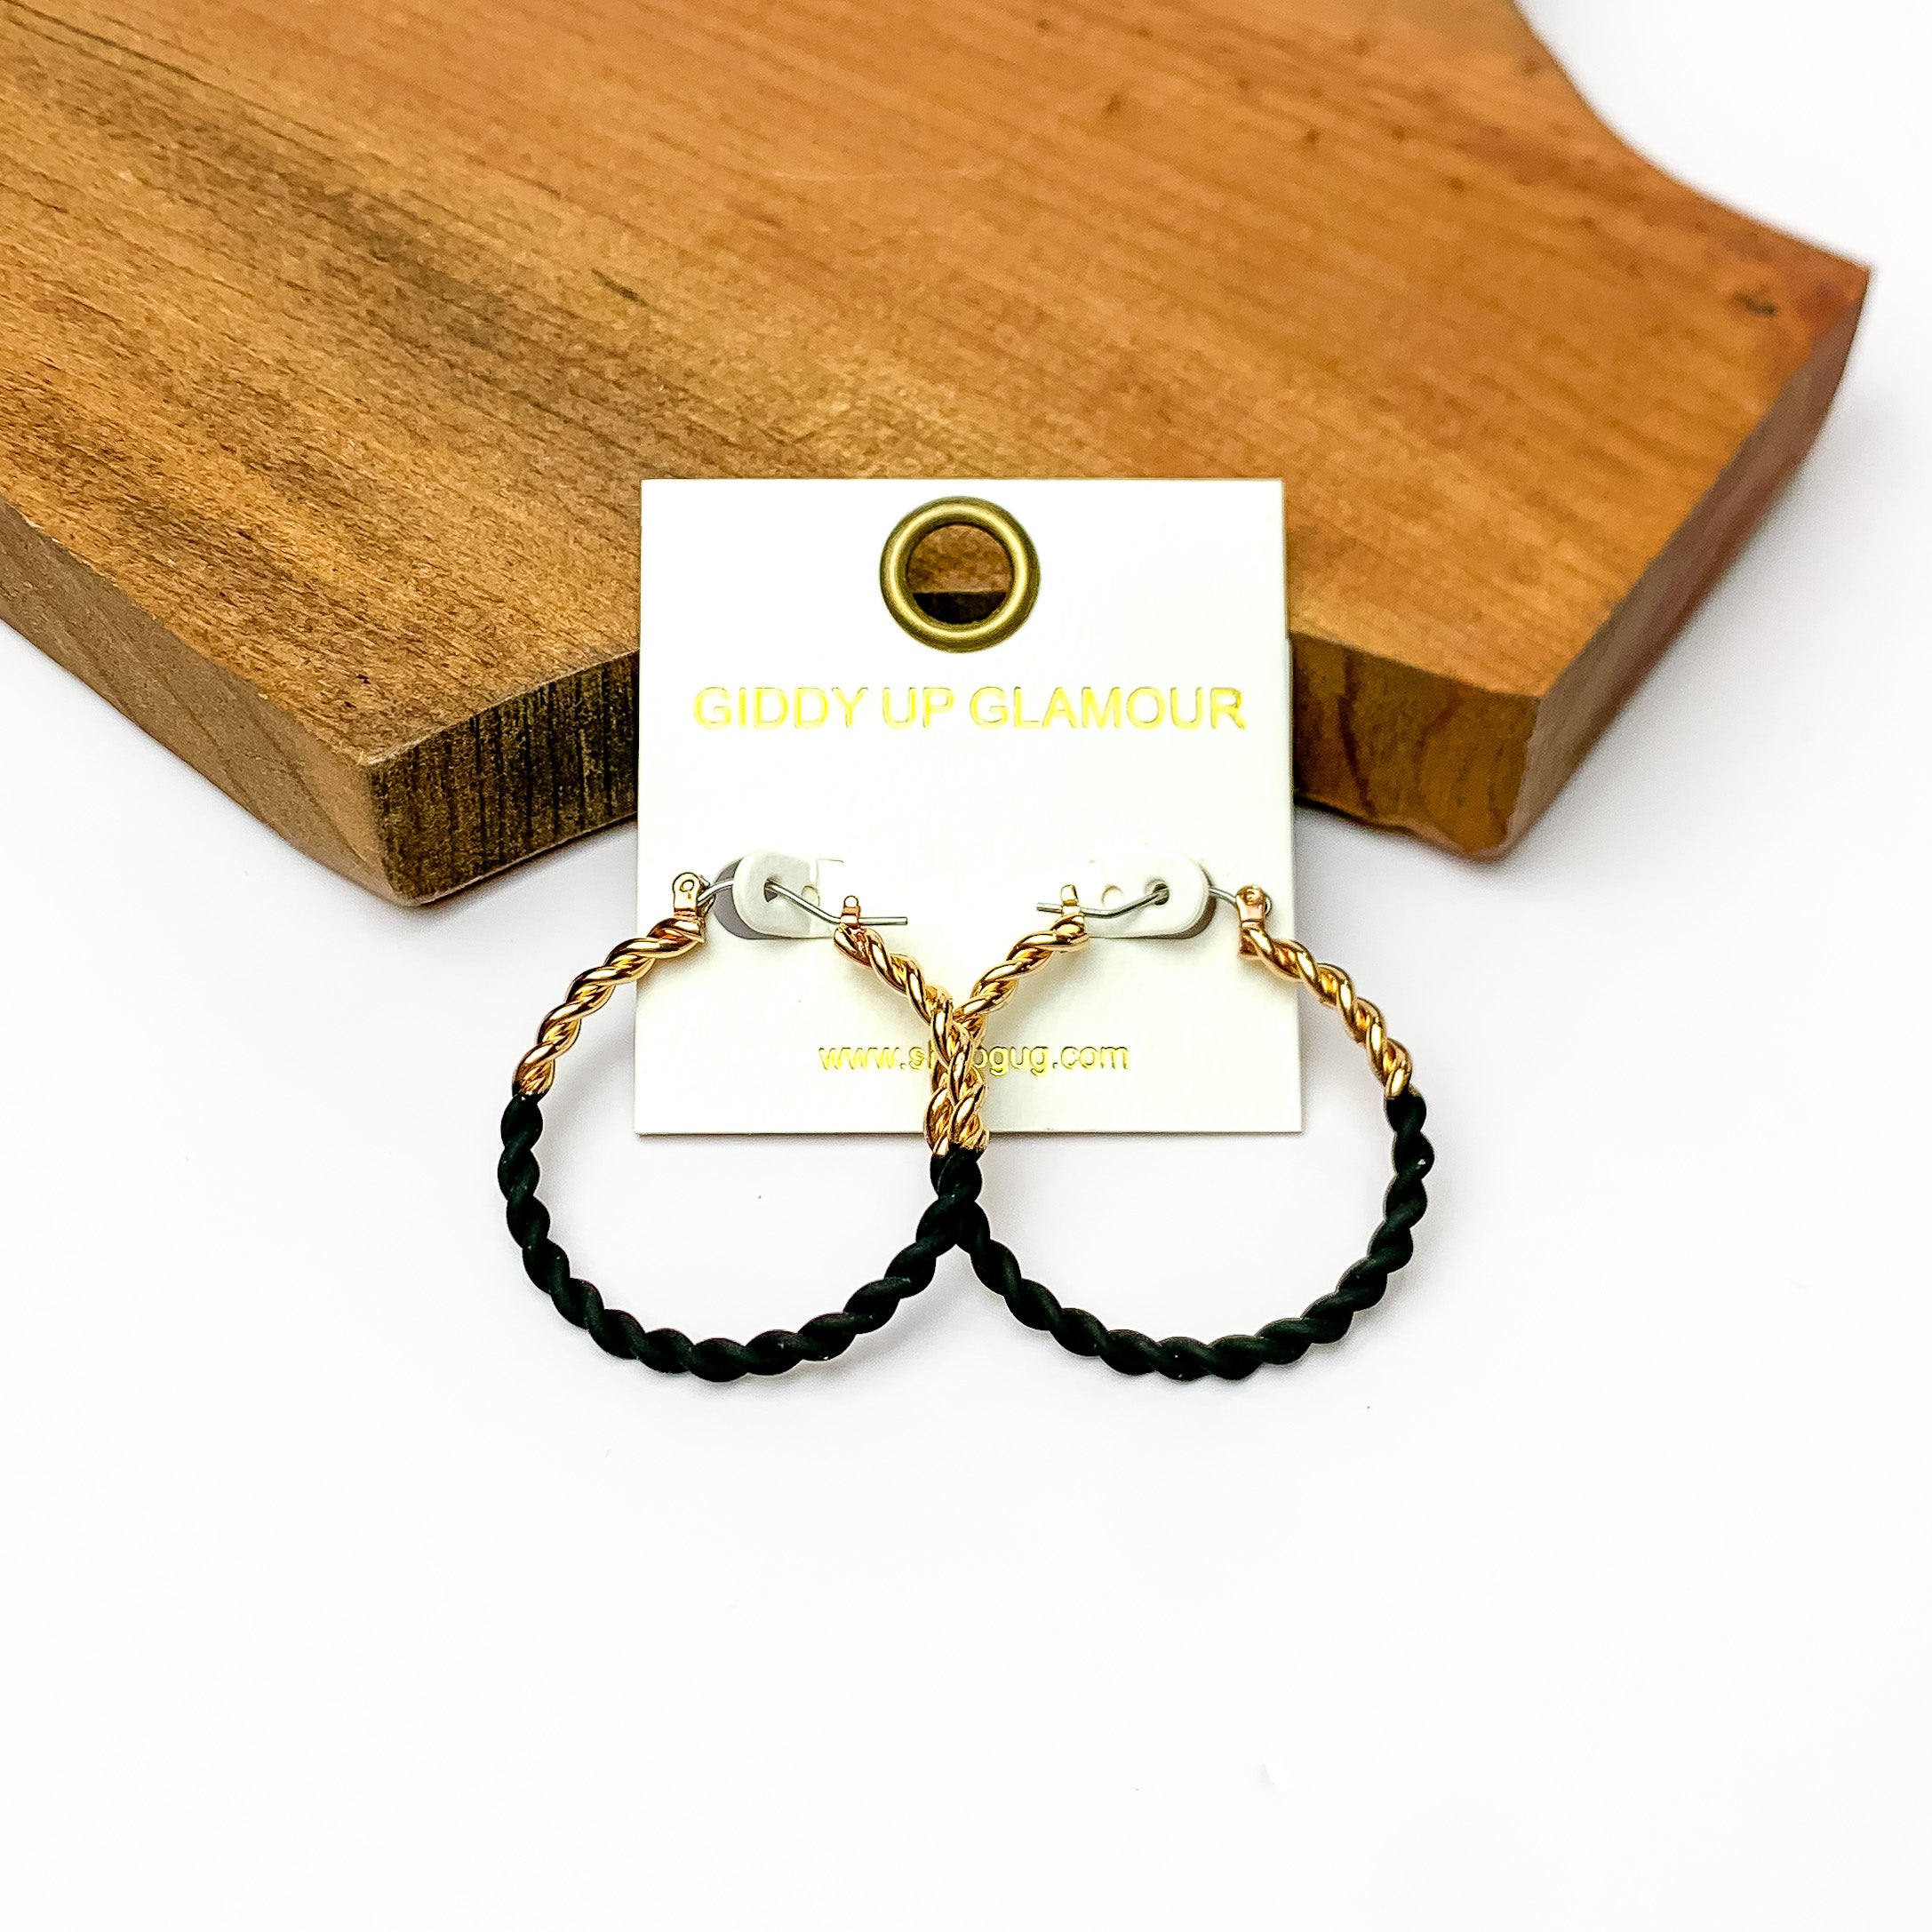 Twisted Gold Tone Hoop Earrings in Black. Pictured on a white background with a wood piece behind it.